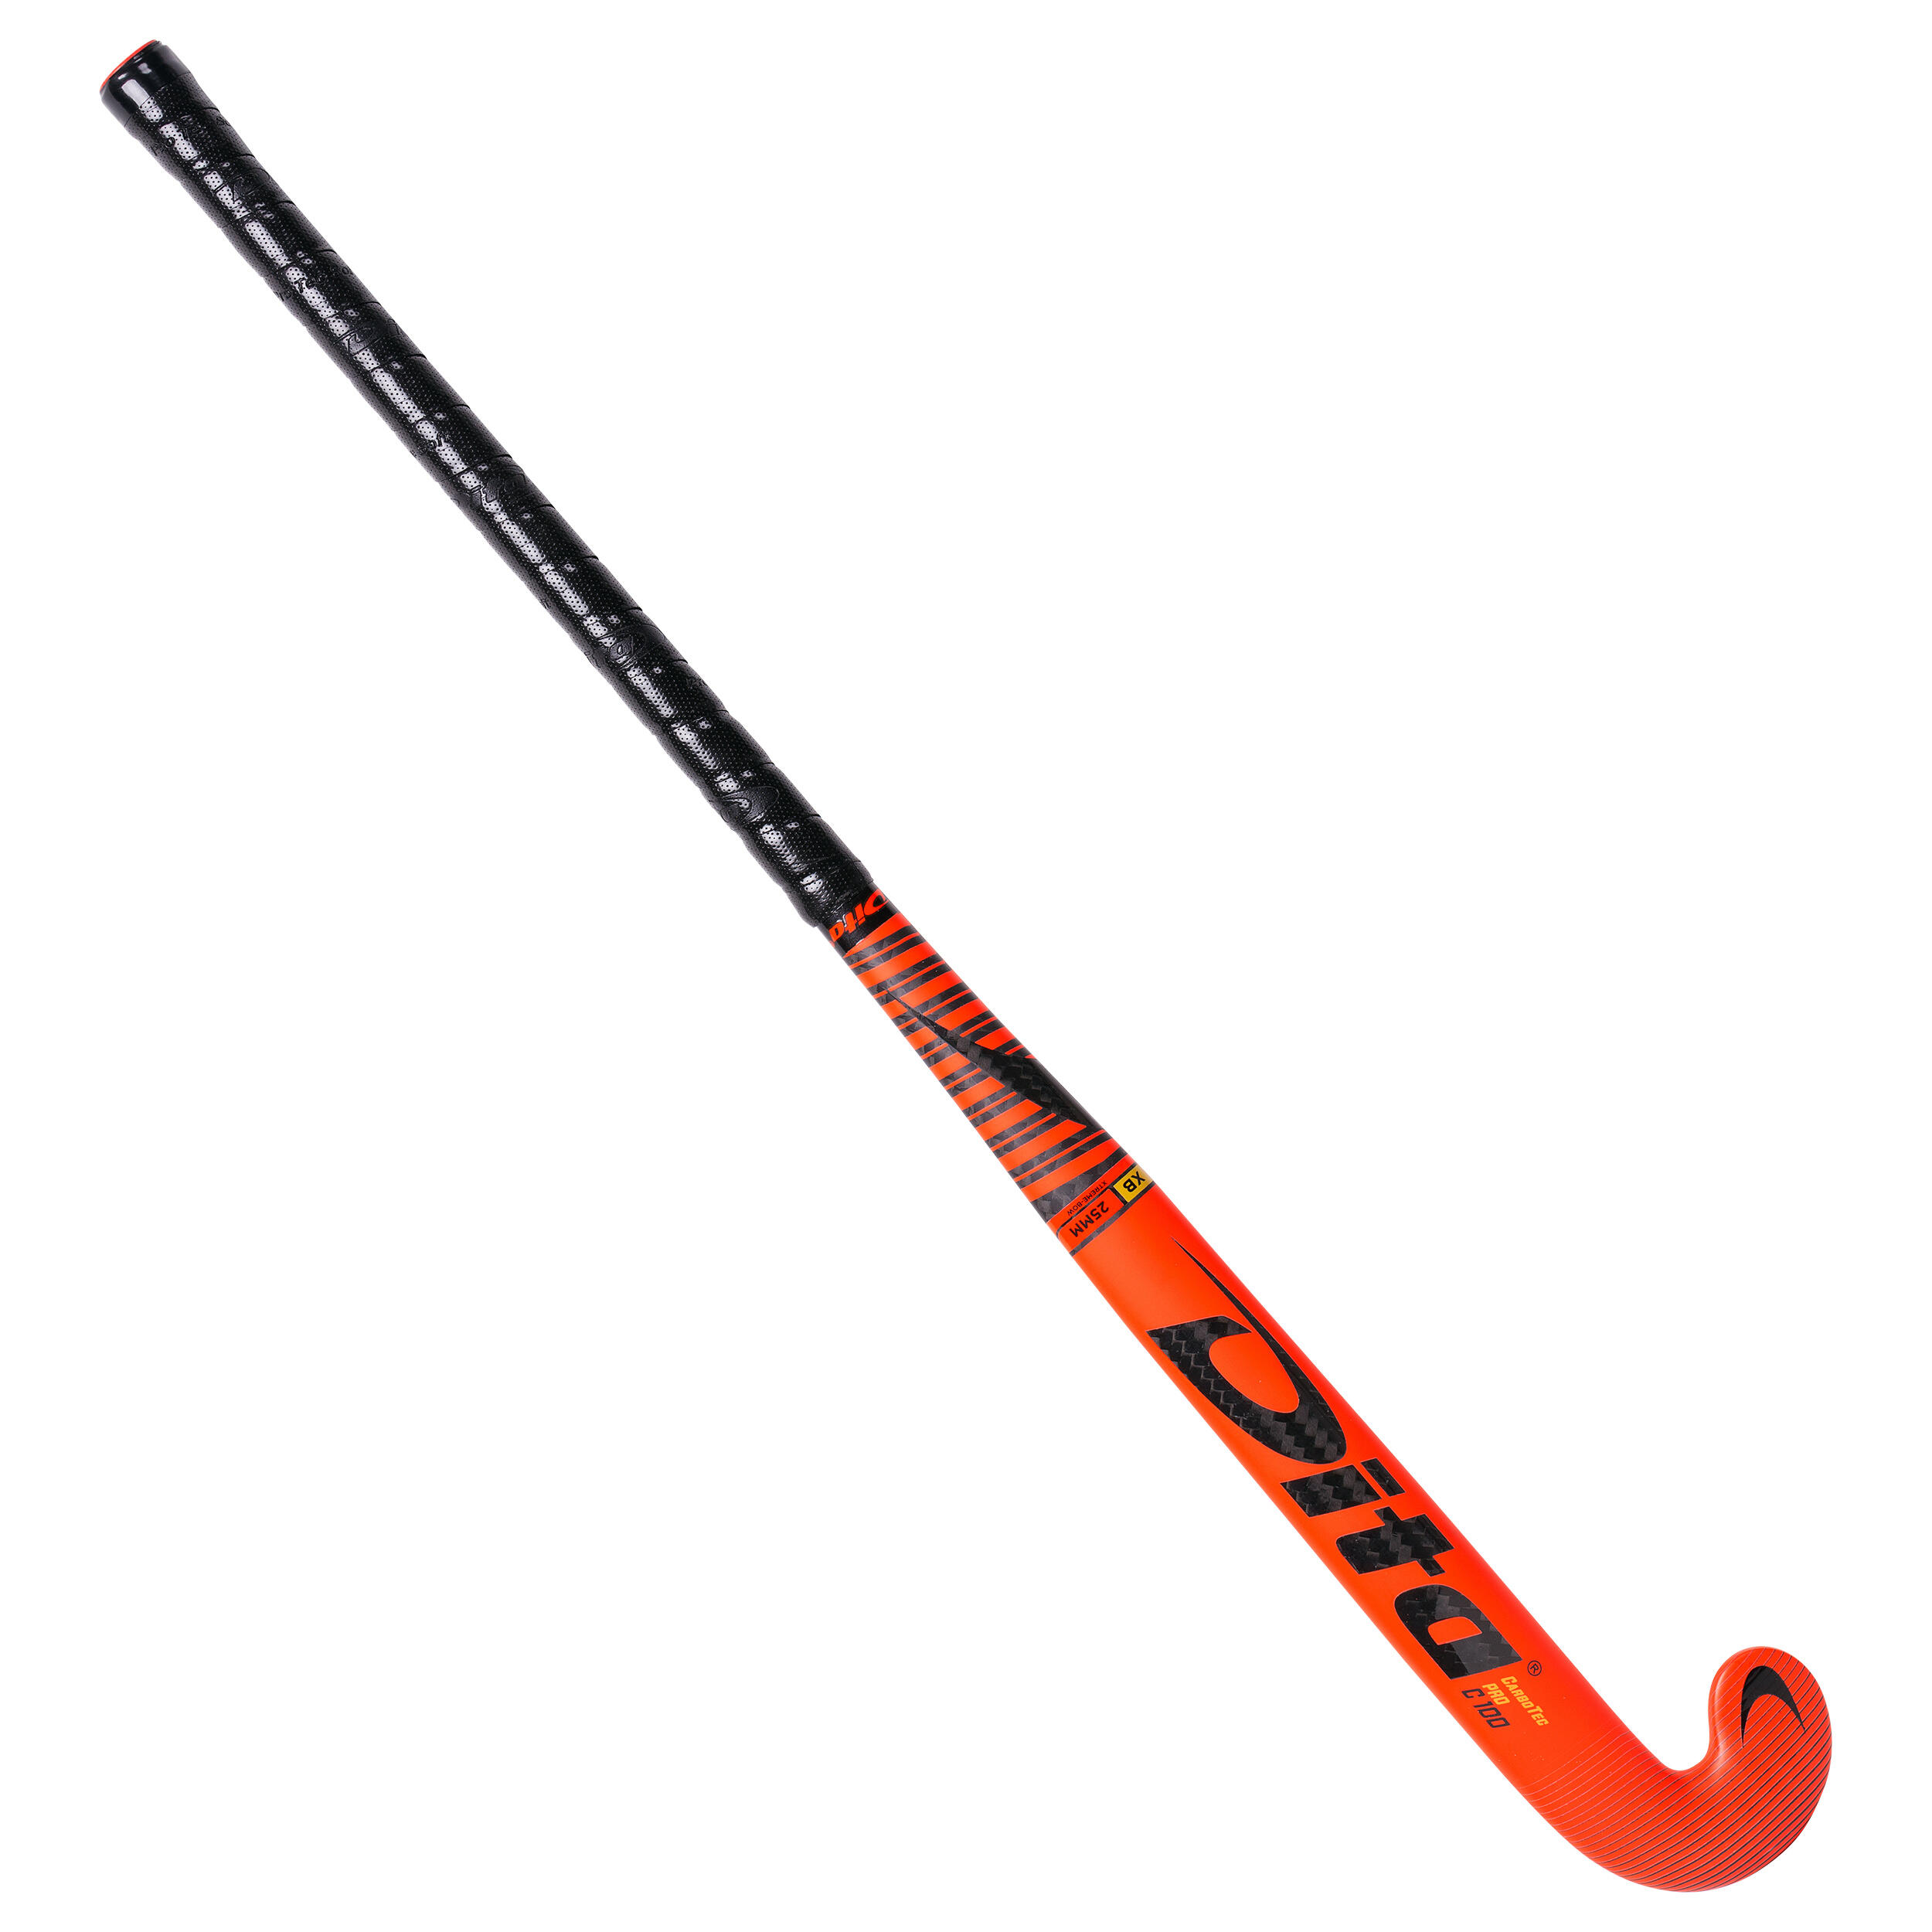 Adult Advanced Indoor Hockey Stick XLB 100% Carbon CarboTecPro - Red/Black 1/3